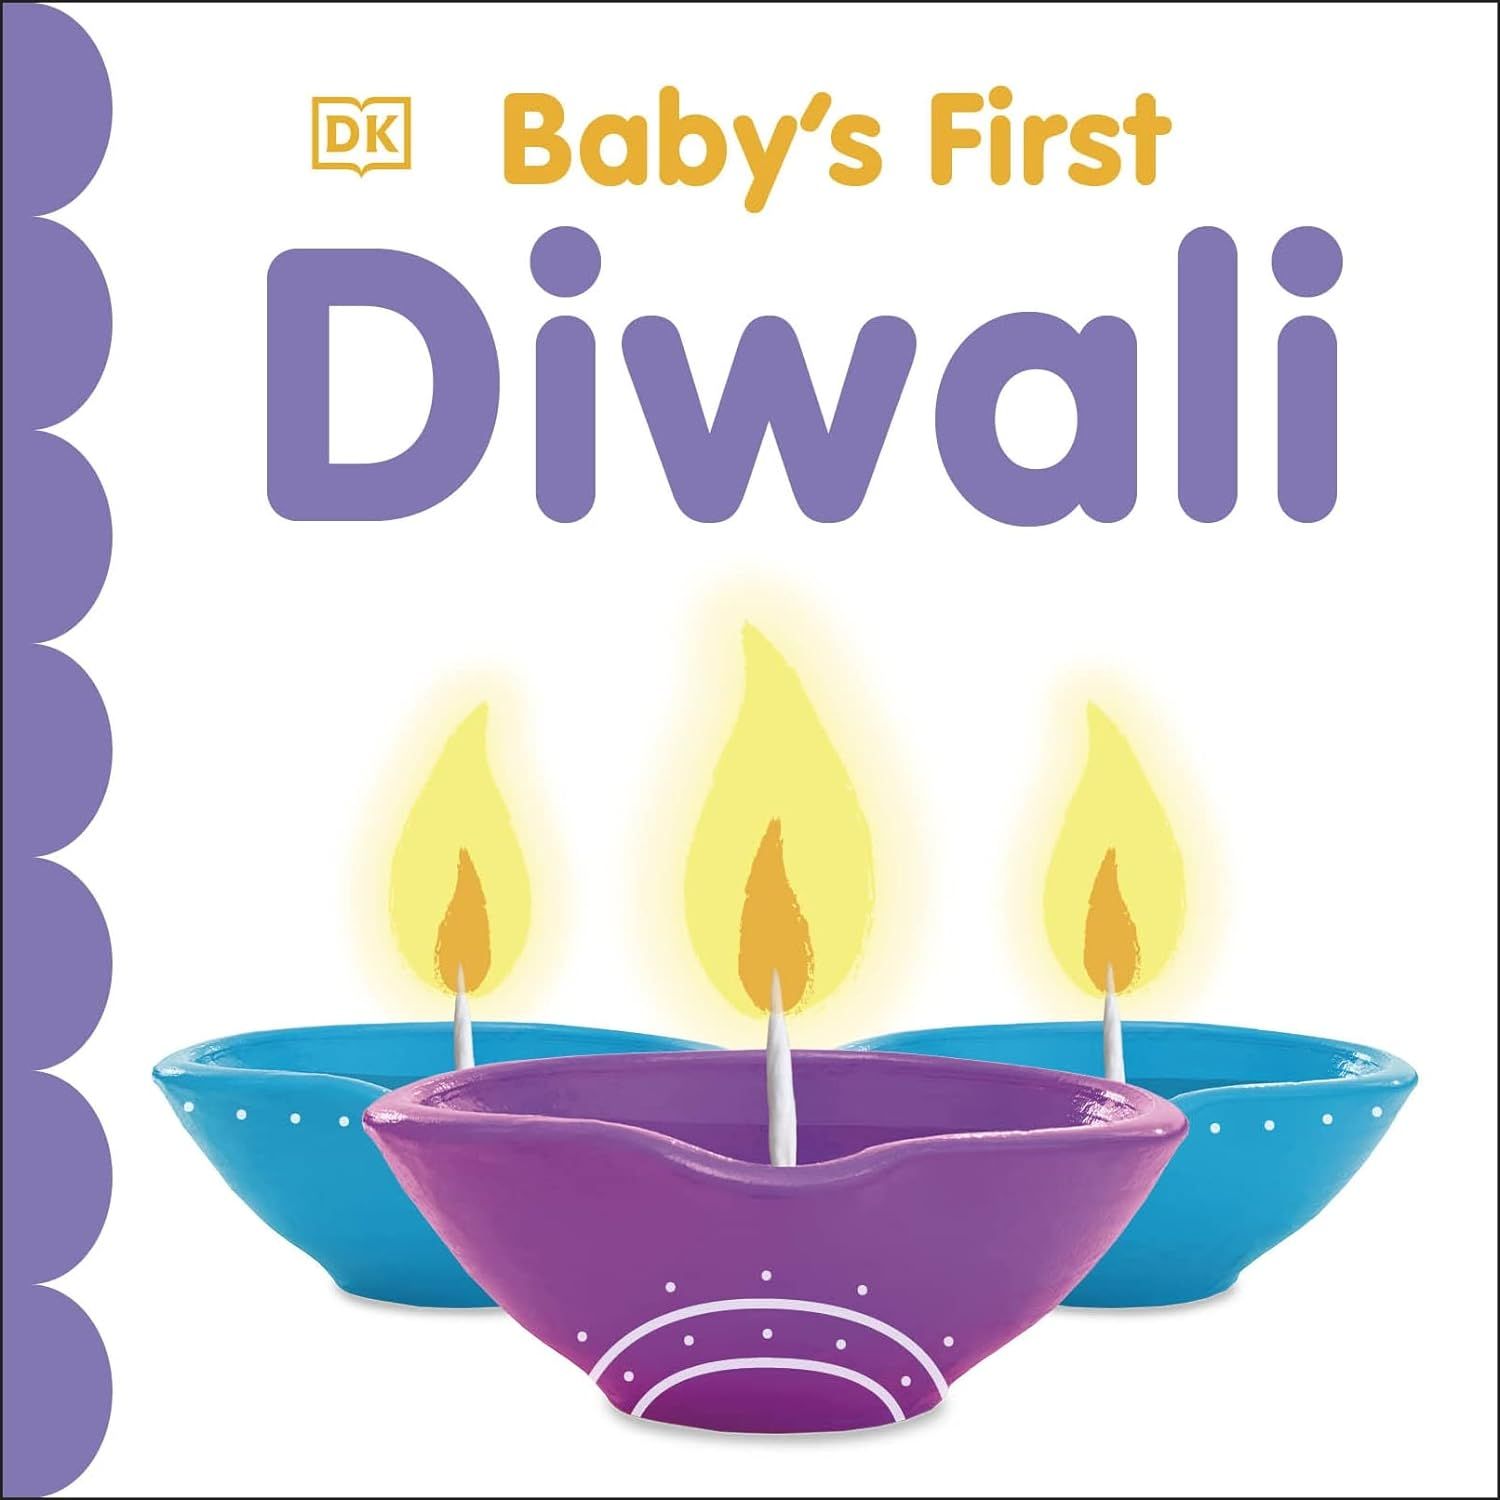 Baby's first diwali book cover